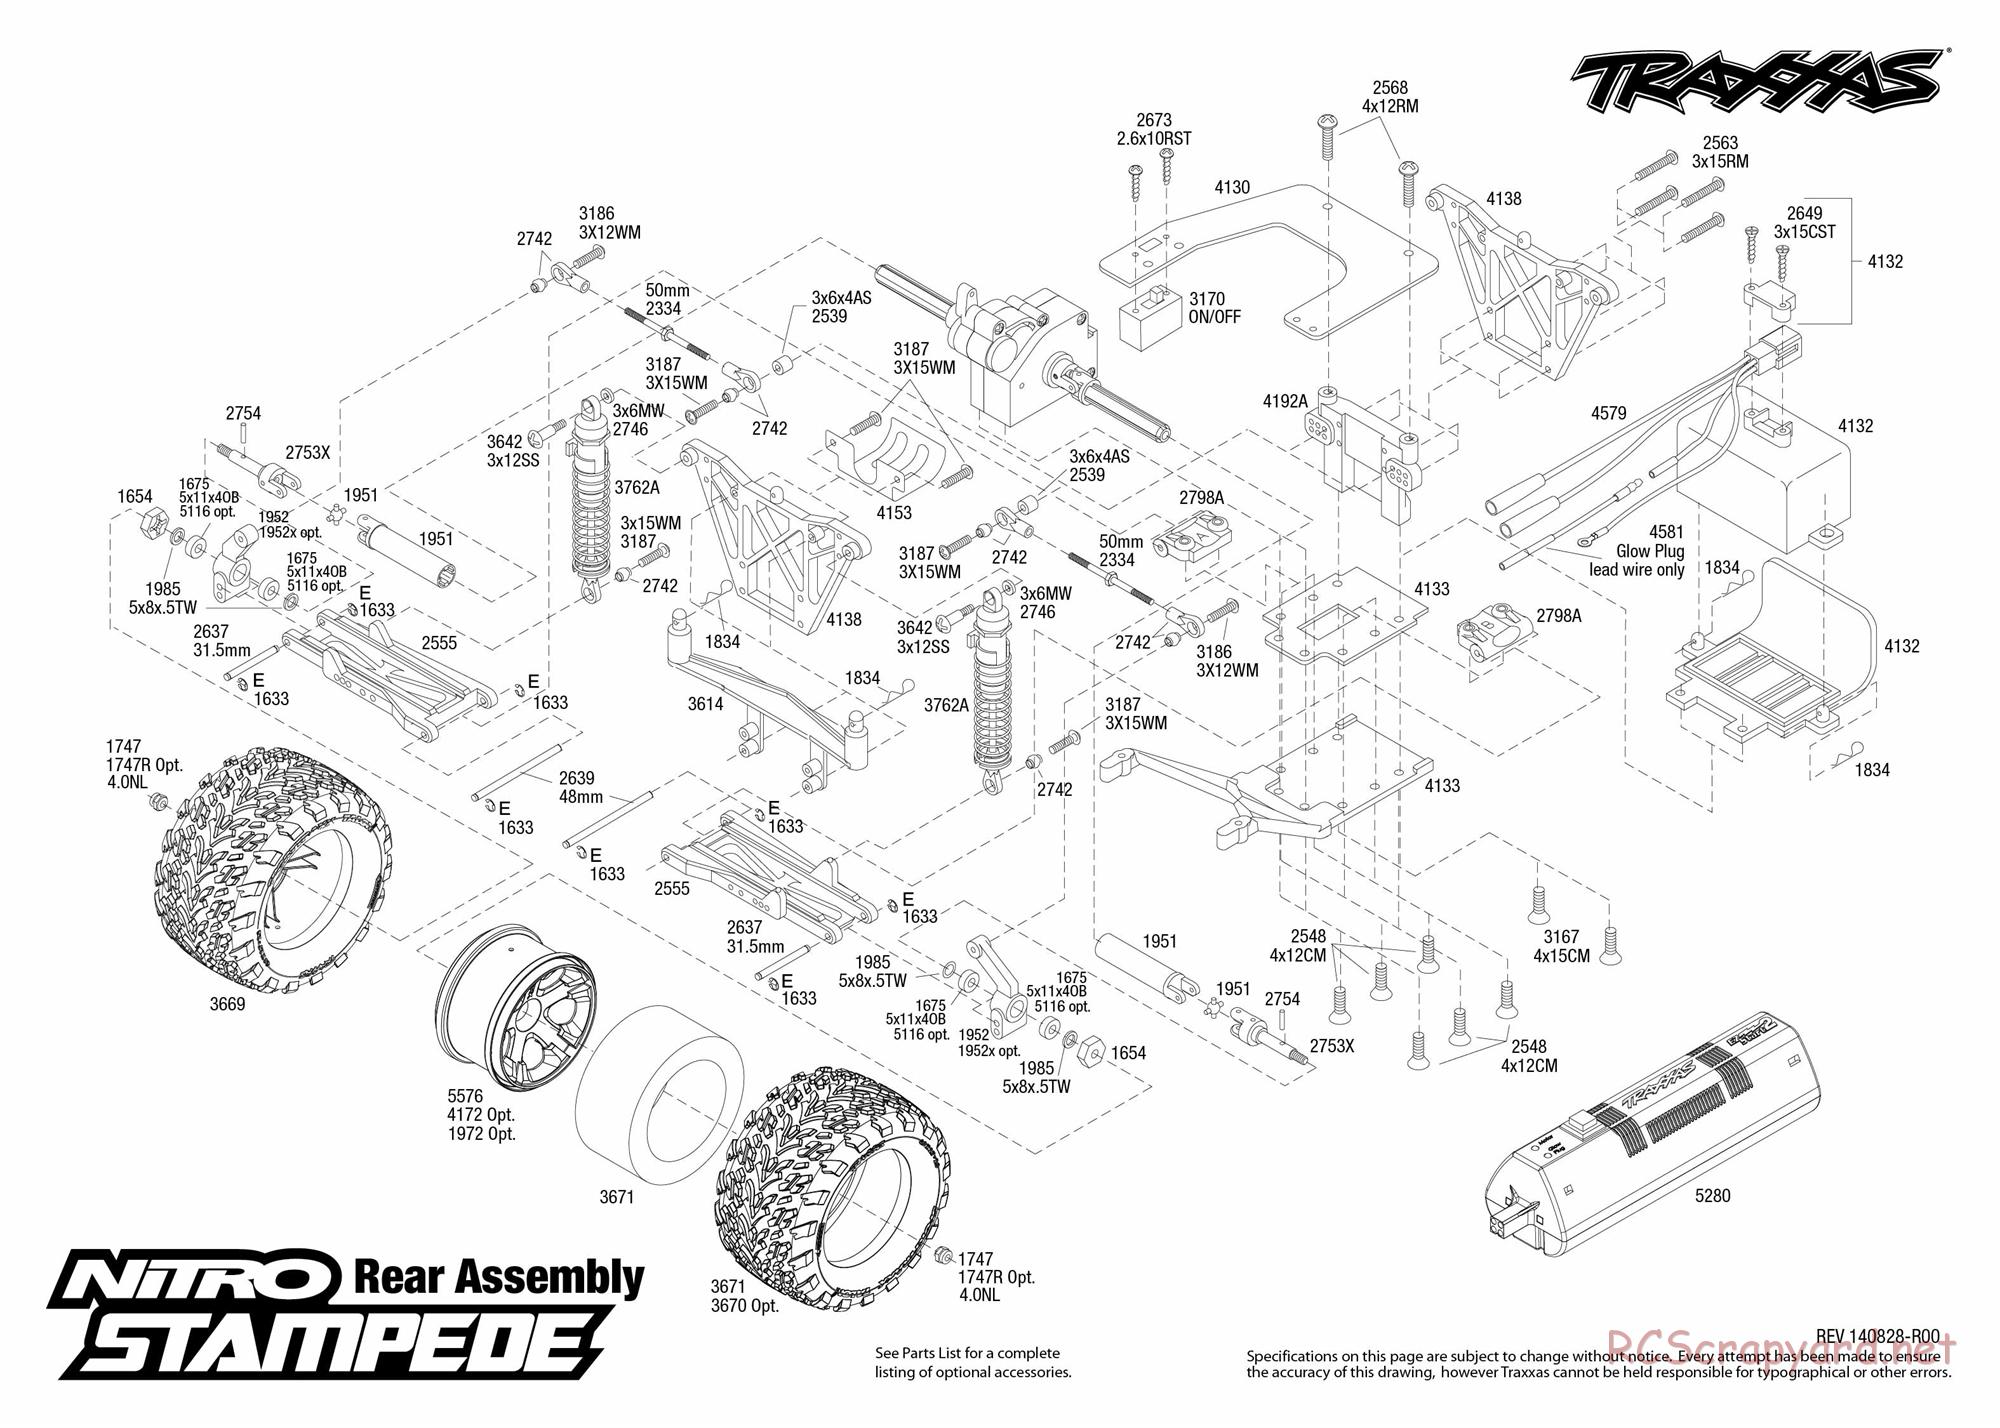 Traxxas - Nitro Stampede (2015) - Exploded Views - Page 3